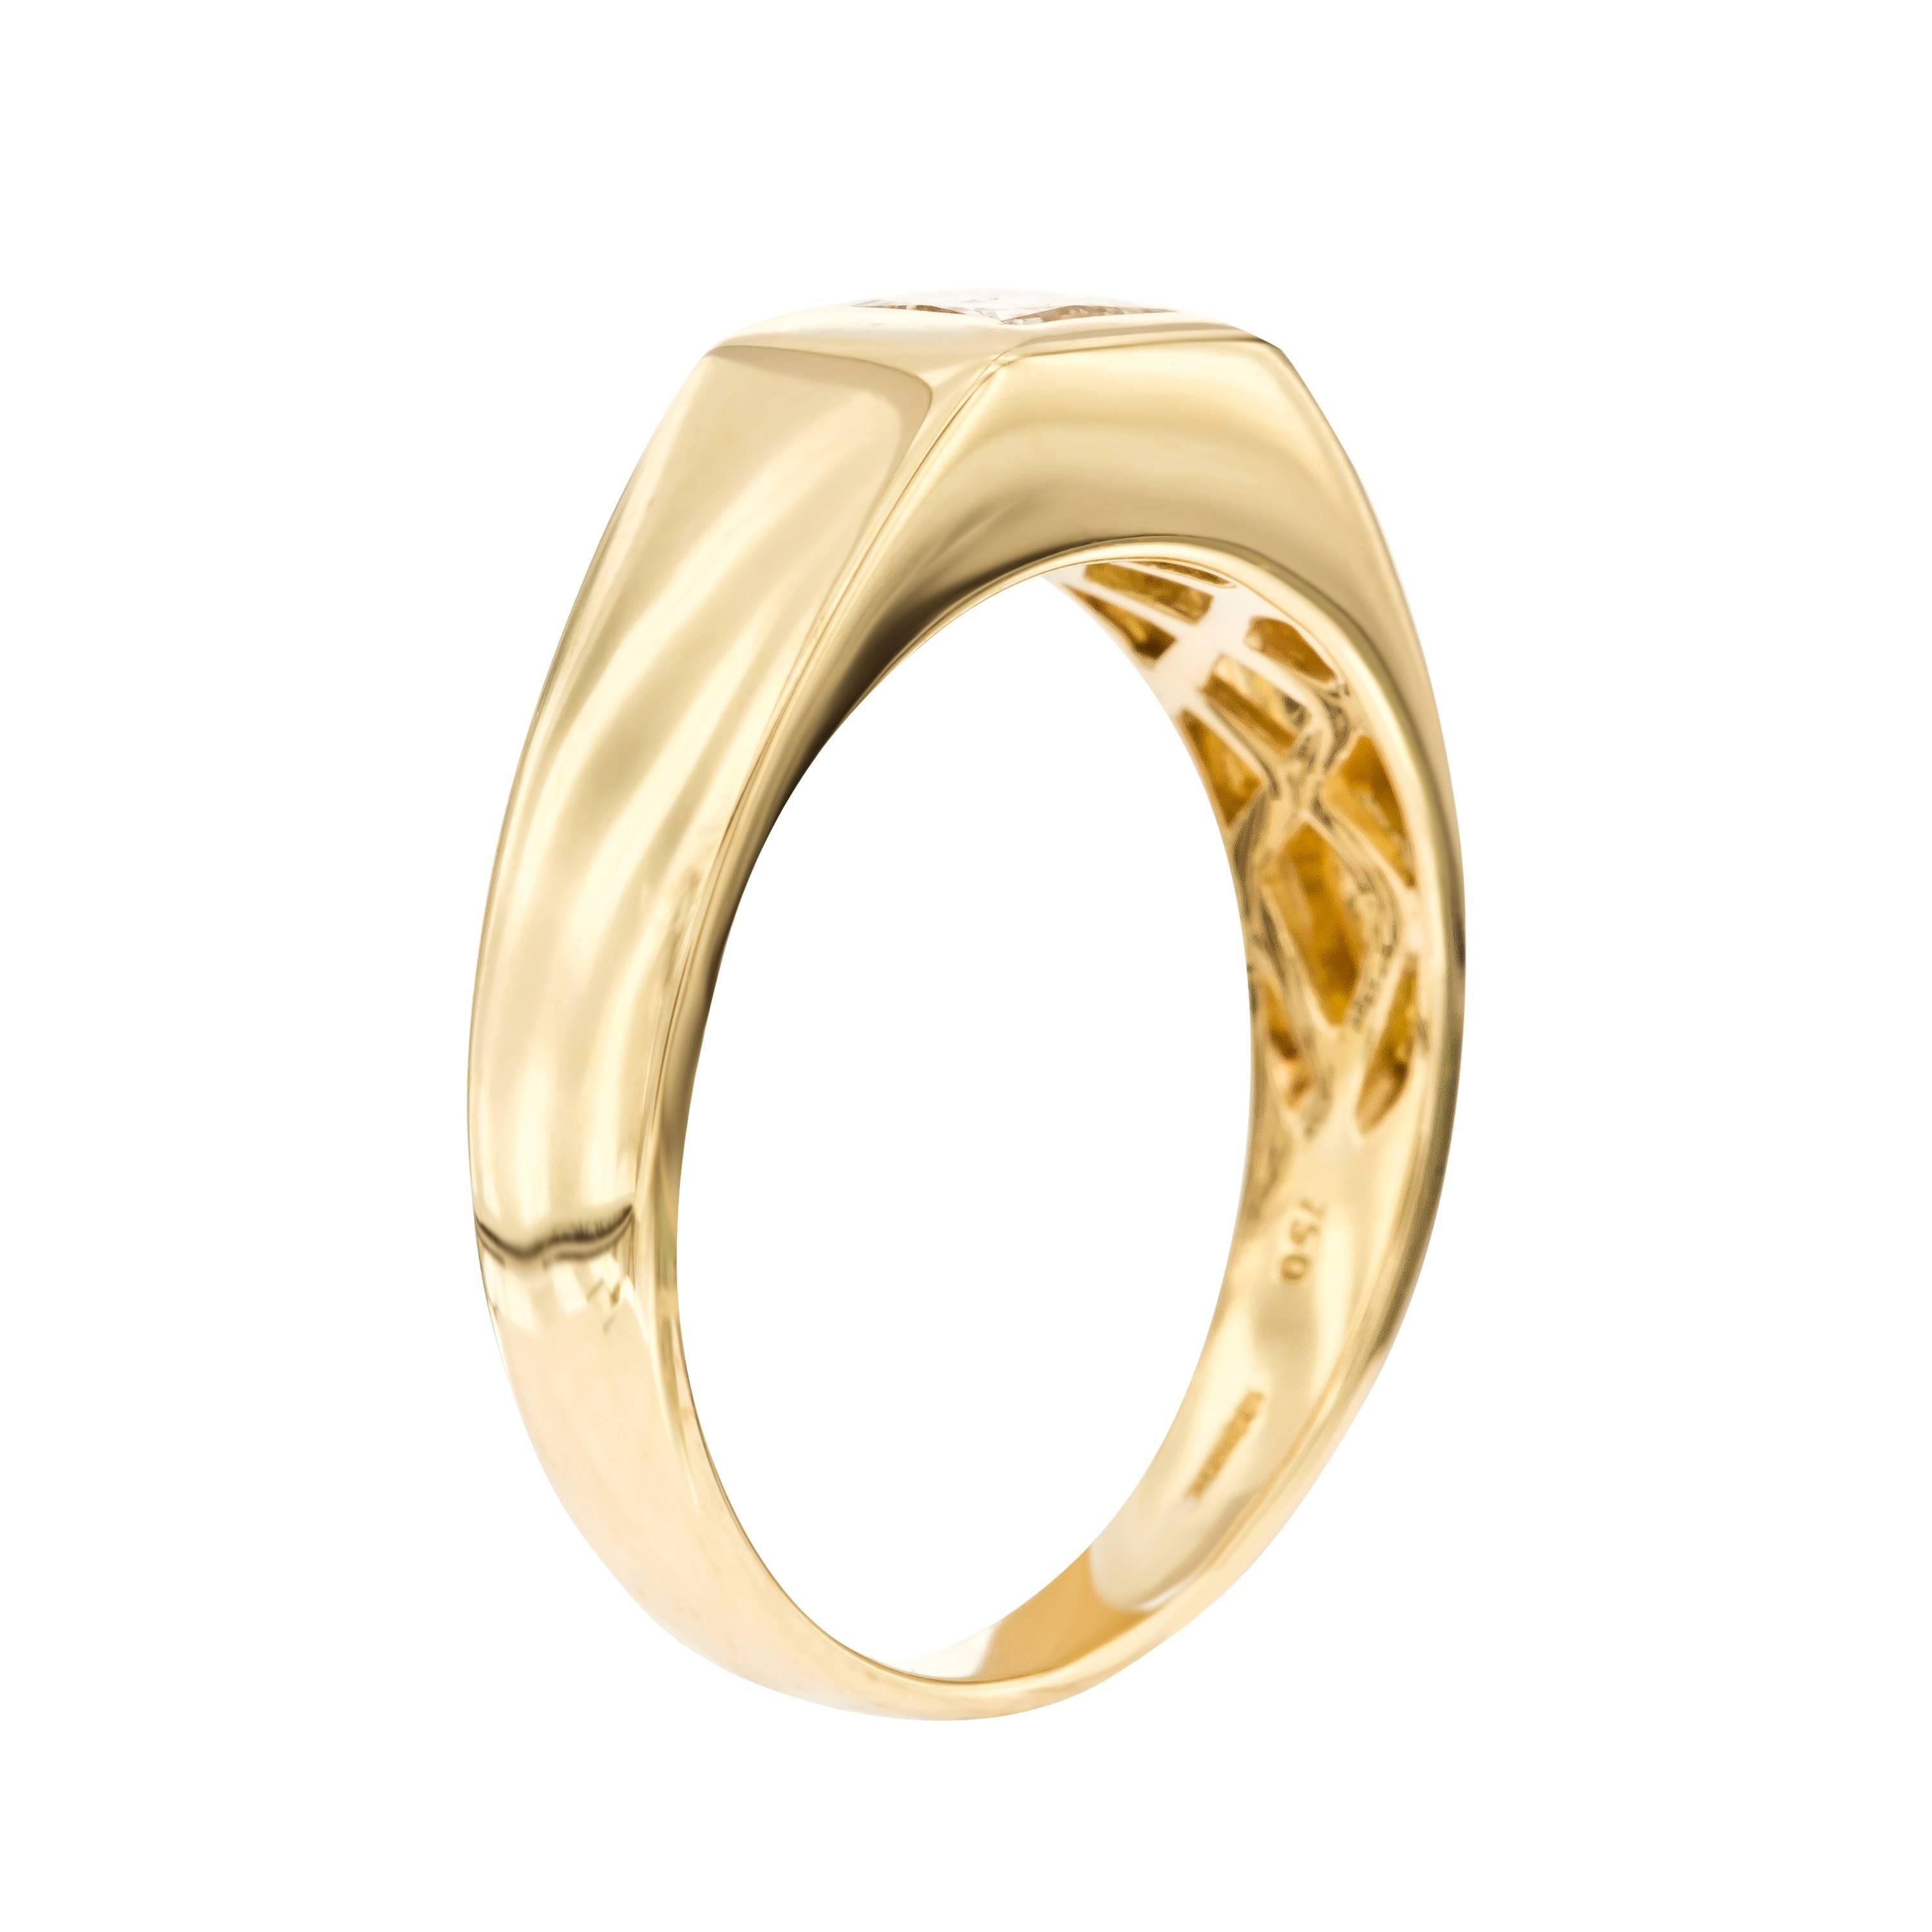 A bespoke 0.70 Carat Princess Cut White Diamond Men's Signet Style ring is set in 18 Karat Yellow Gold with filigree designs on the inside of the shank. Size UK - S, US - 9 1/2, color H/I clarity SI1. This ring is available in other Diamond weights